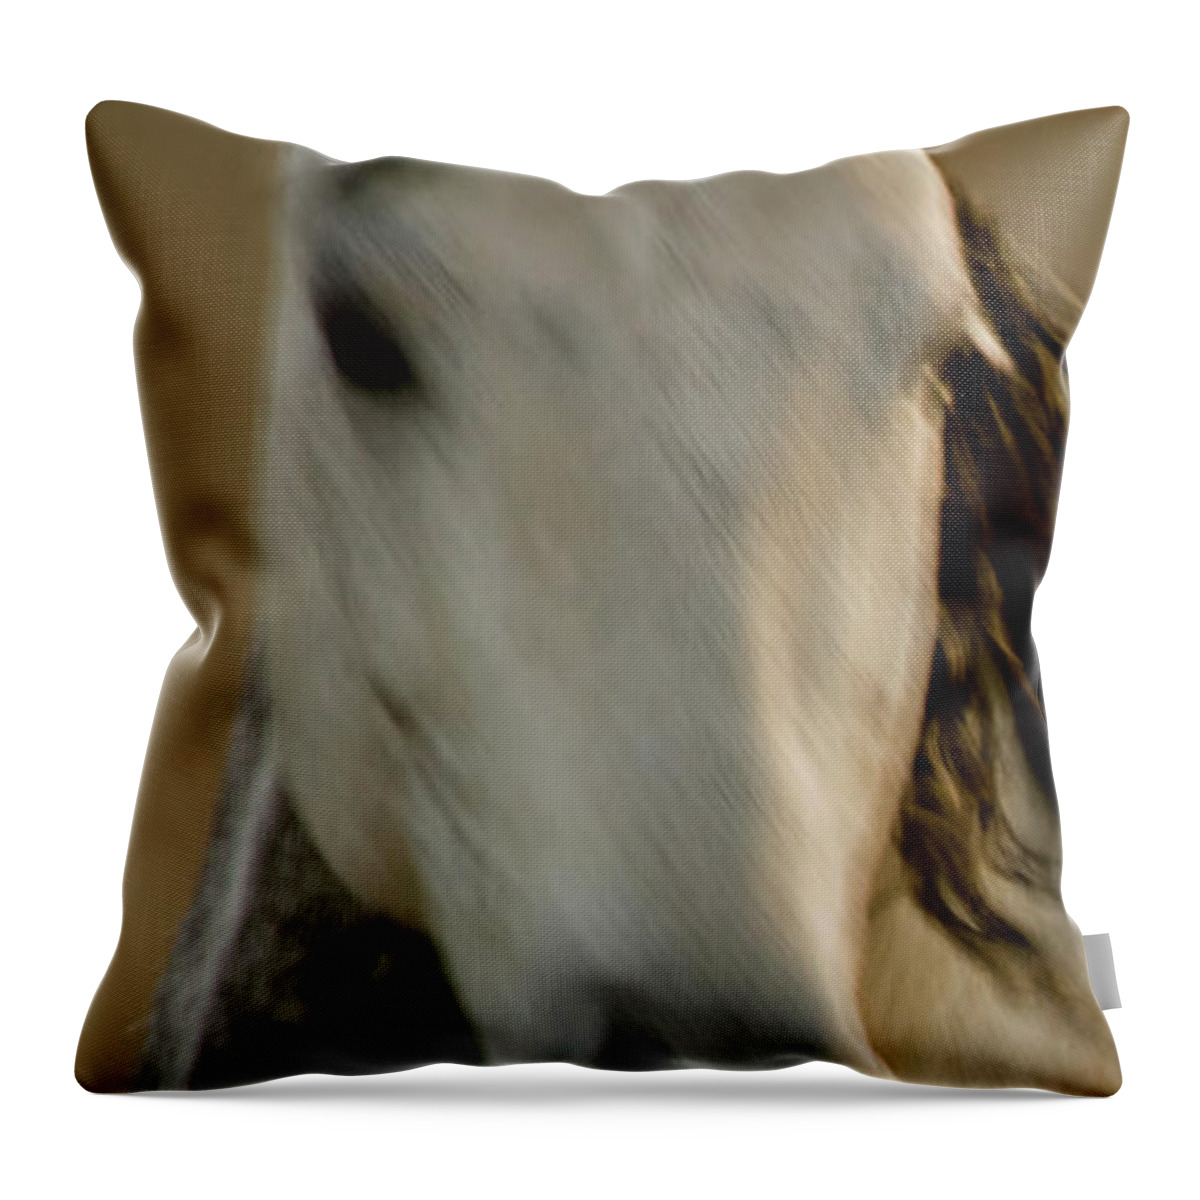 Andalusia Throw Pillow featuring the photograph Americano 1 by Catherine Sobredo